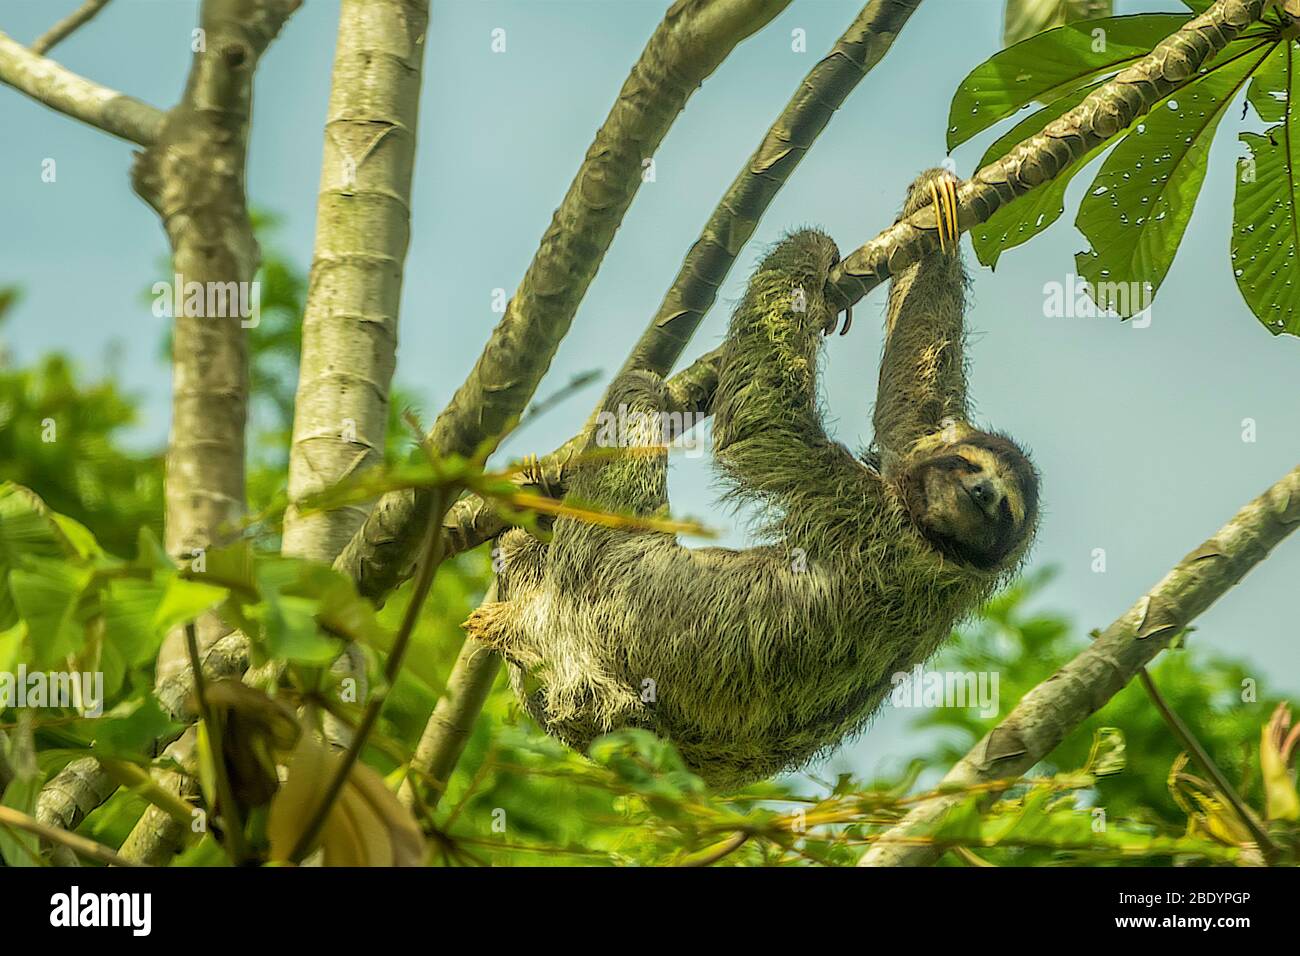 SLoth (bradypus didactylus) In A Tree, Costa Rica, Central America Stock Photo